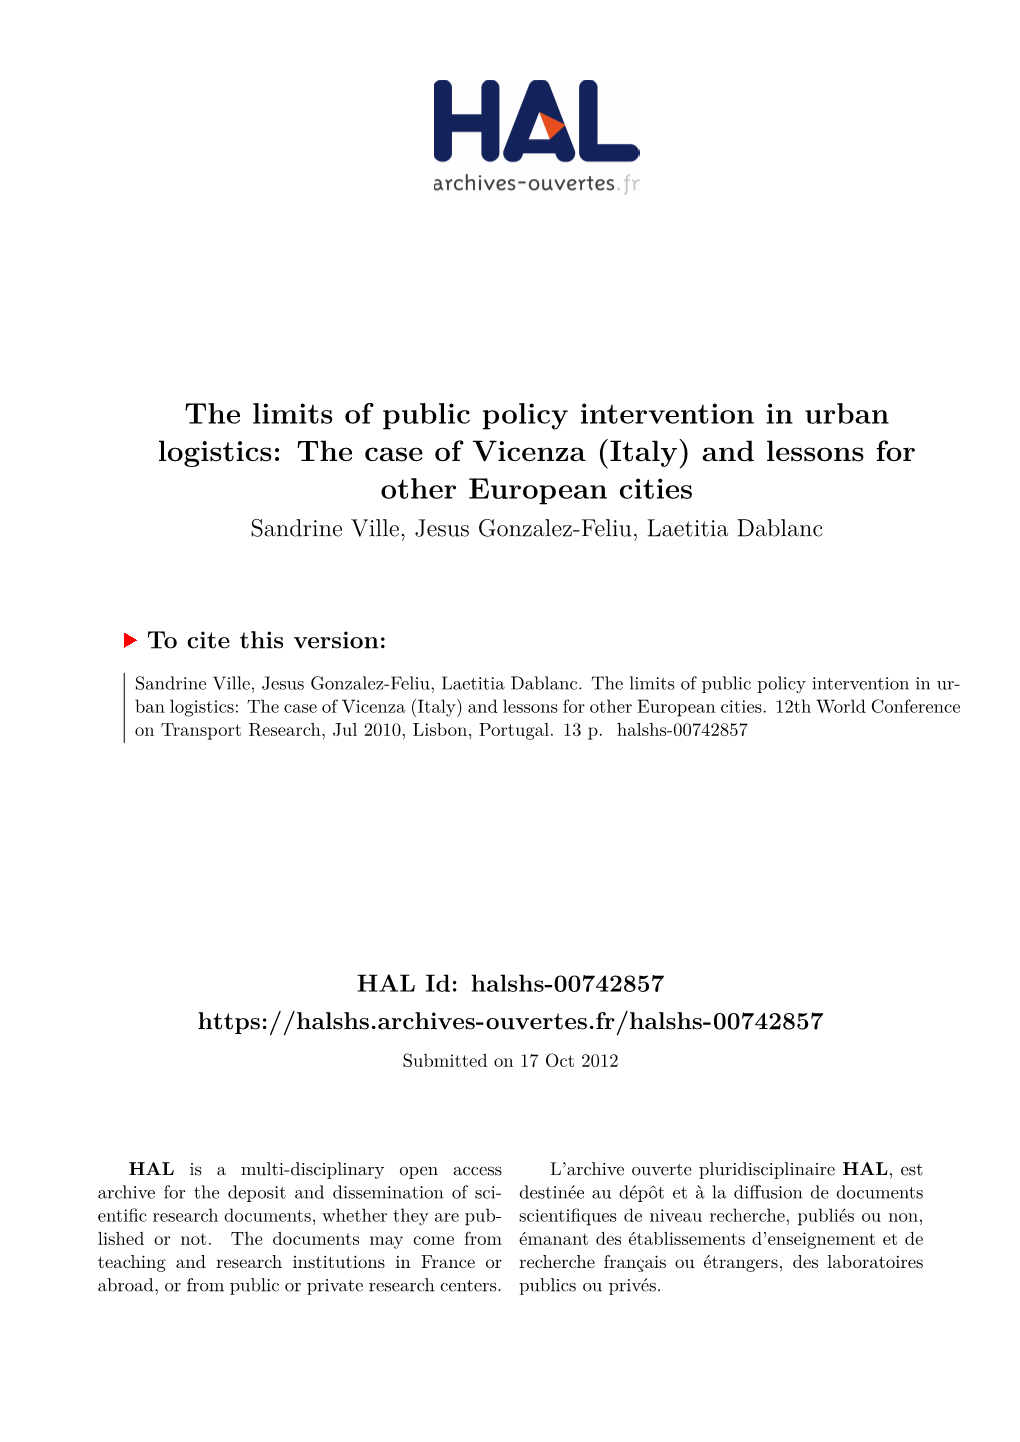 The Limits of Public Policy Intervention in Urban Logistics: The